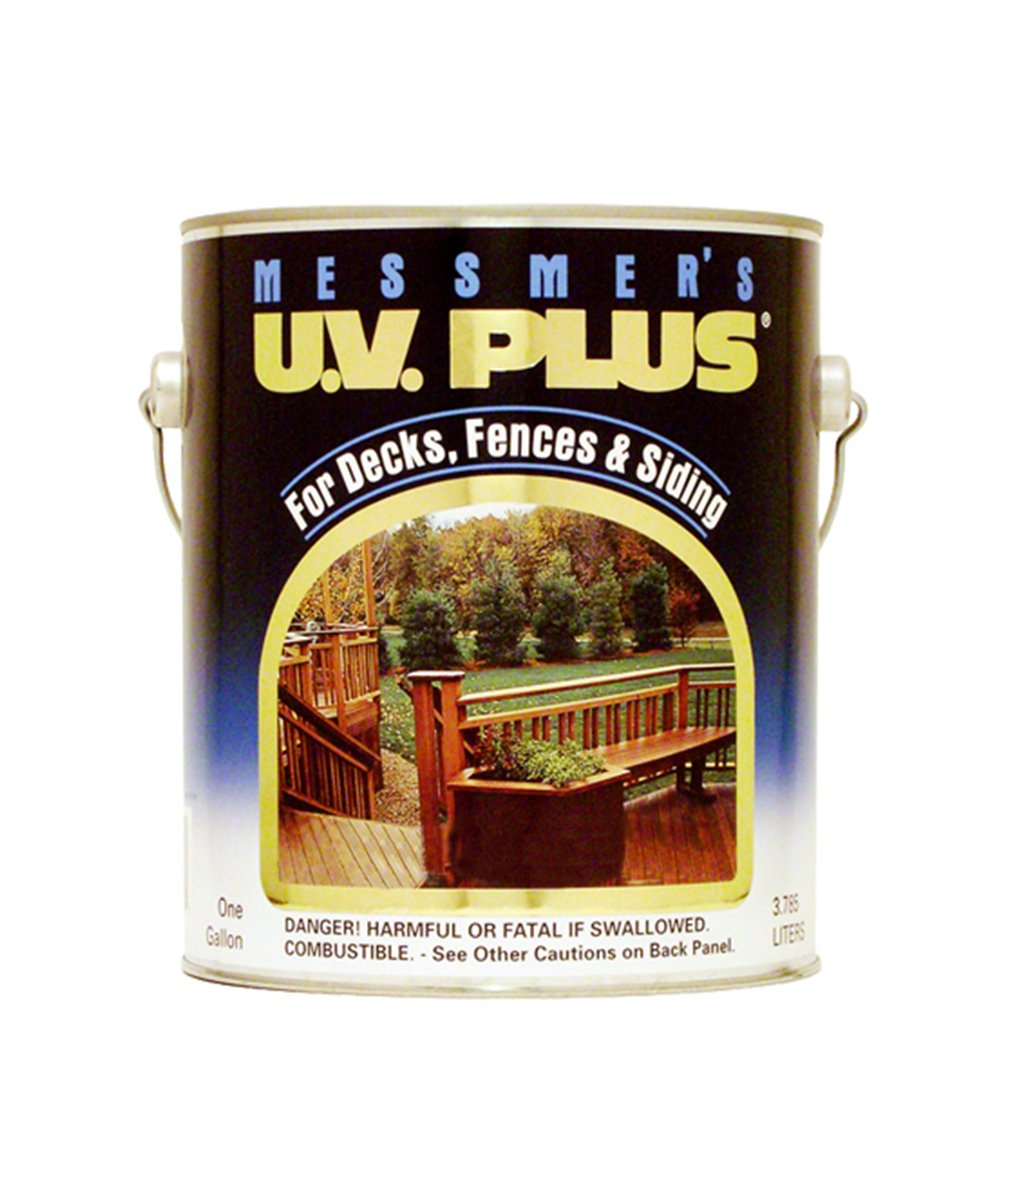 Messmers UV Natural Finish, available at Catalina Paints in CA.